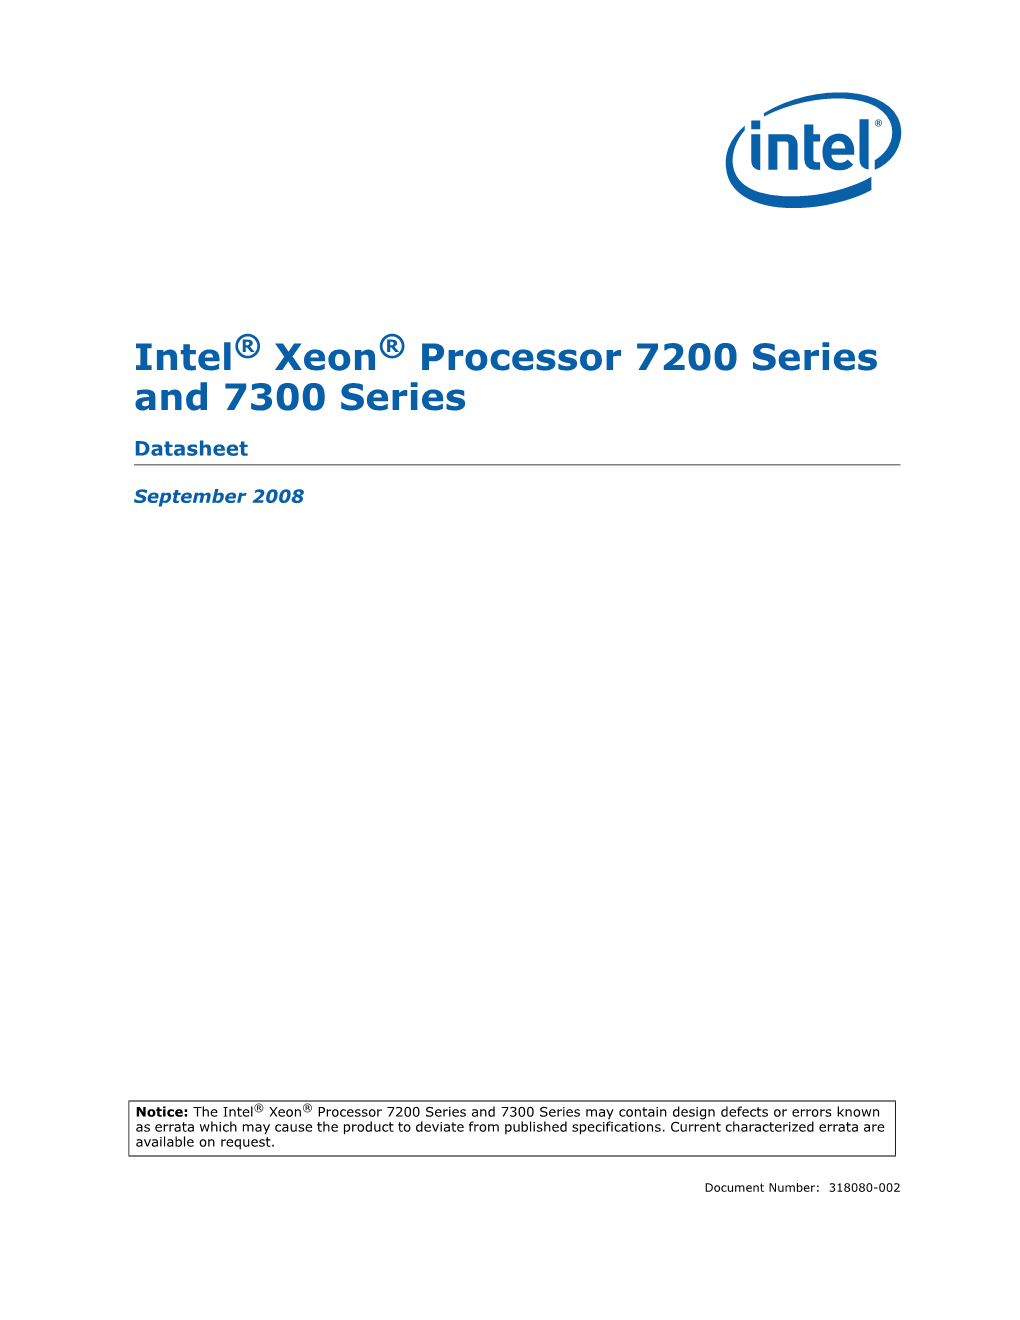 Intel Xeon Processor 7200 Series and 7300 Series and Dual-Core Intel® Xeon® Processor 7200 Series